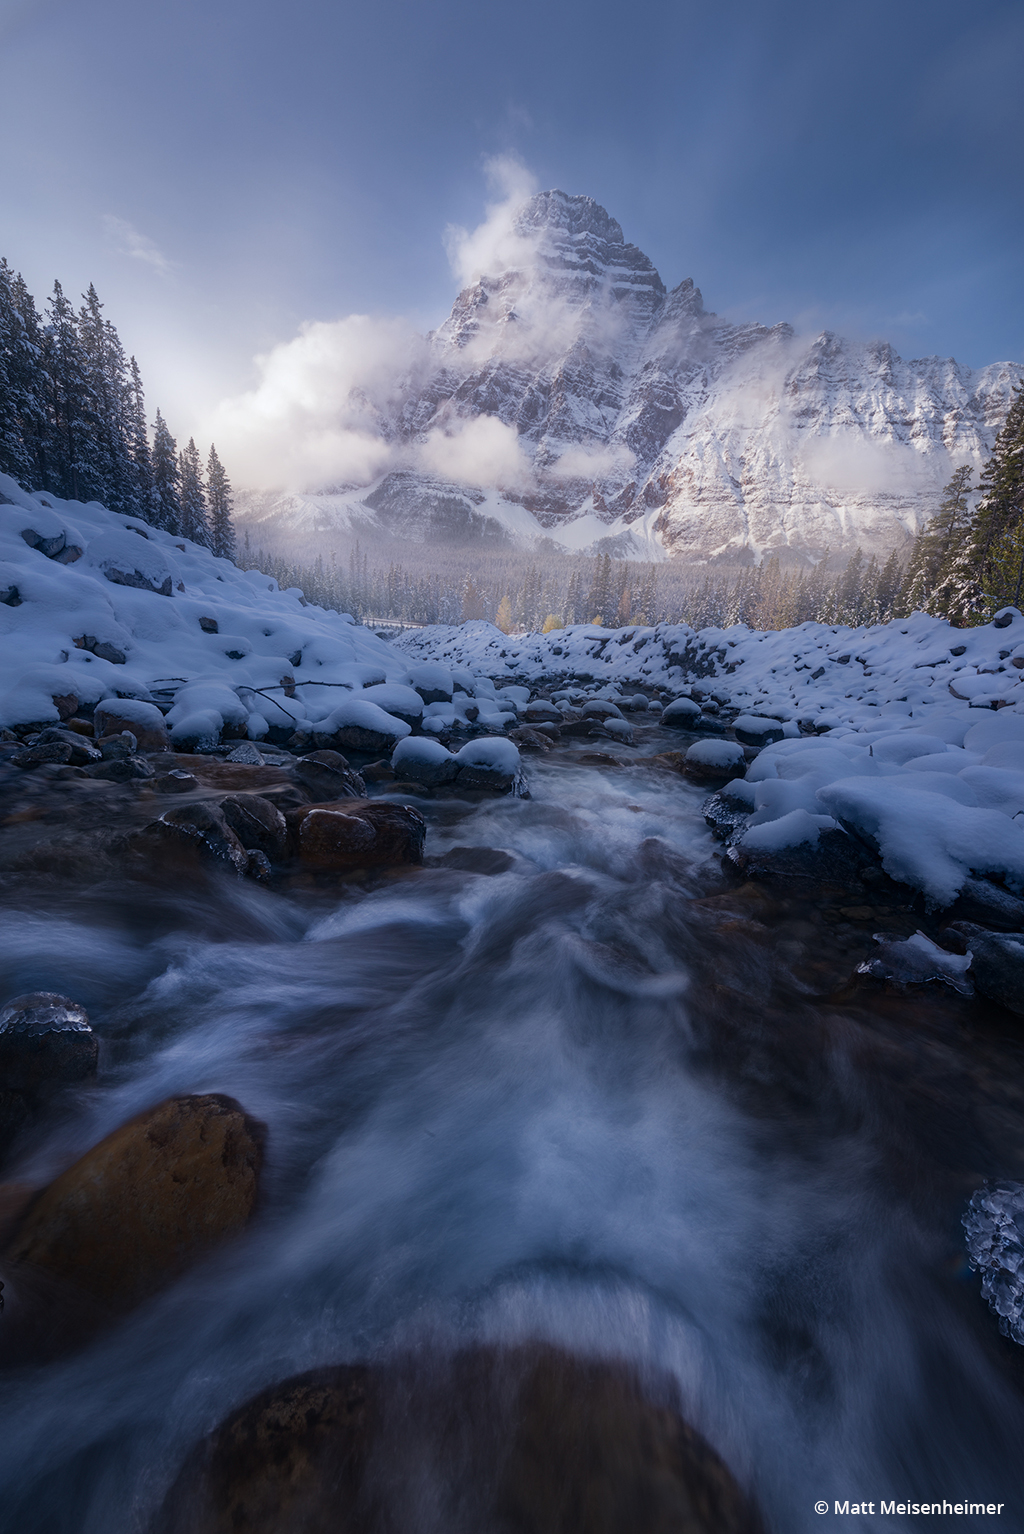 Today’s Photo Of The Day is “Winter’s Touch” by Matt Meisenheimer. Location: Banff National Park, Alberta, Canada.